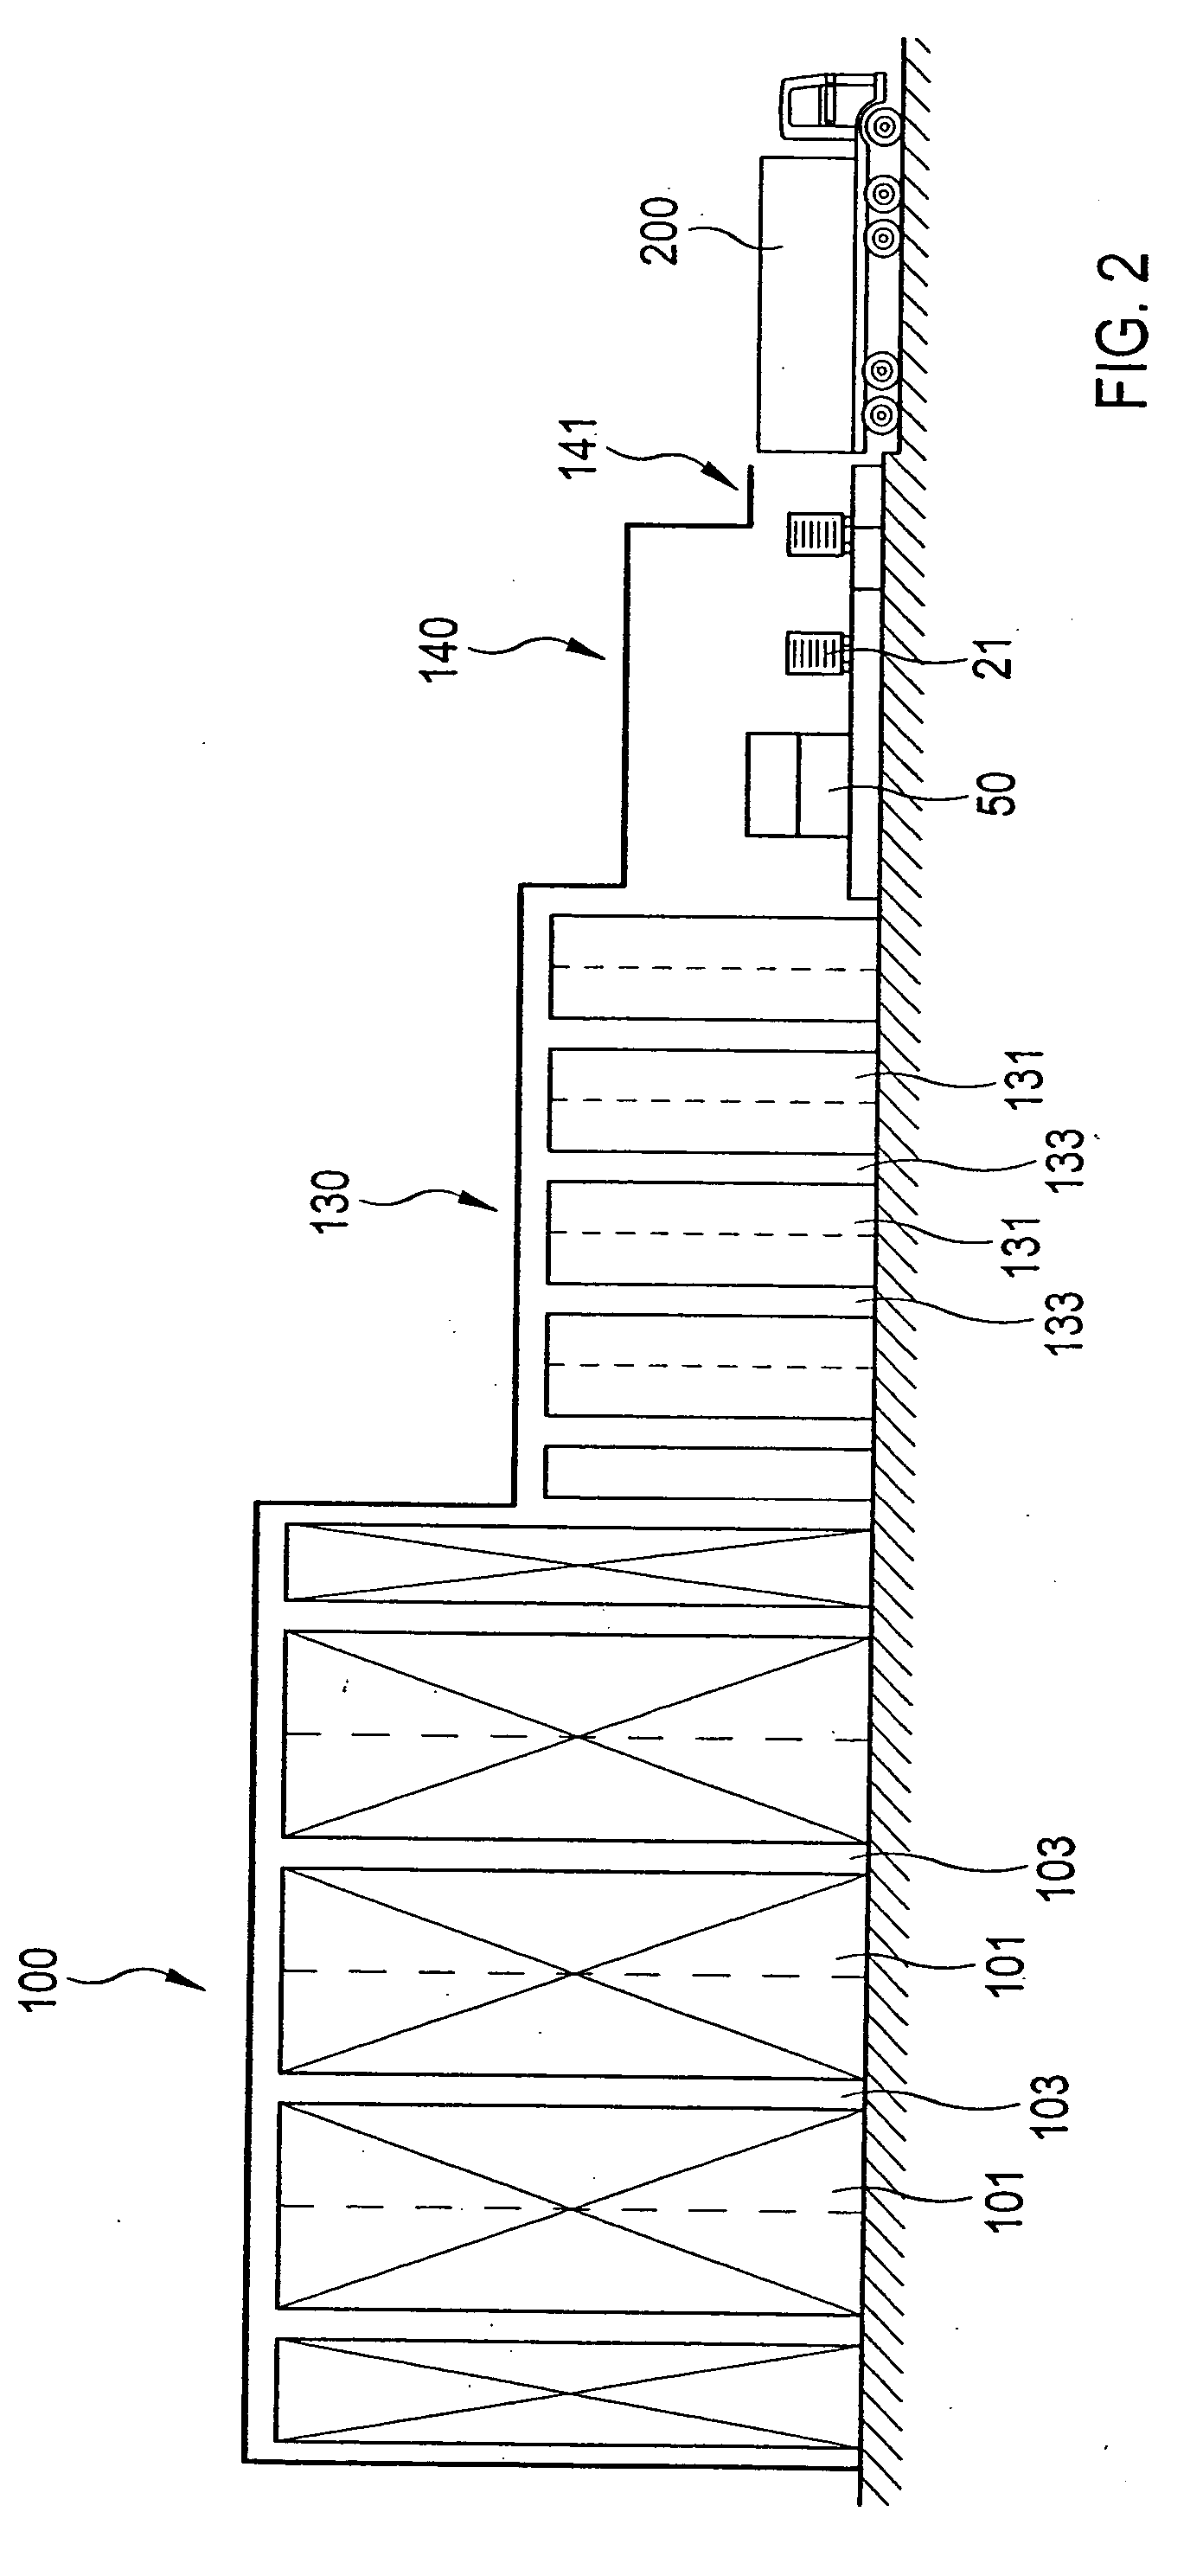 Load-carrier loading apparatus